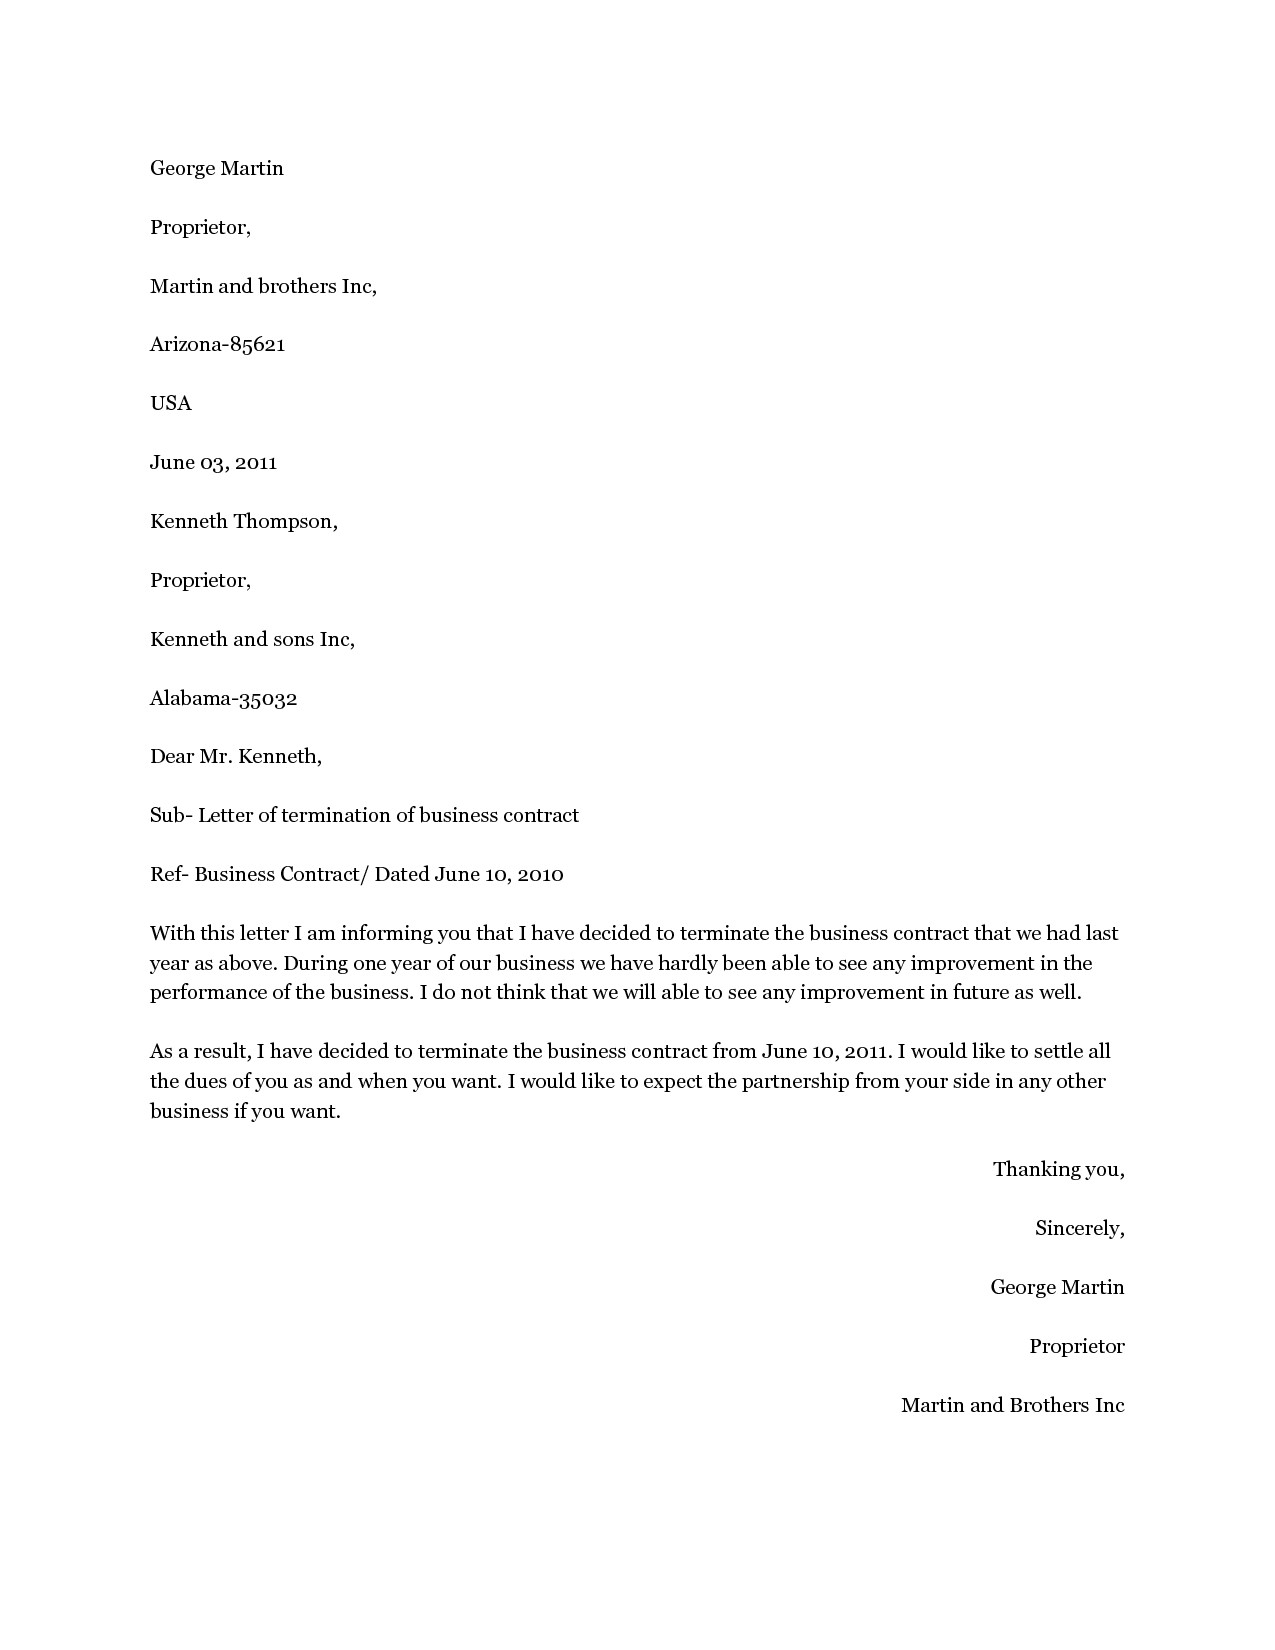 Cancel Service Contract Letter Template - Cancellation Contract Elegant Refund Agreement Sample Image